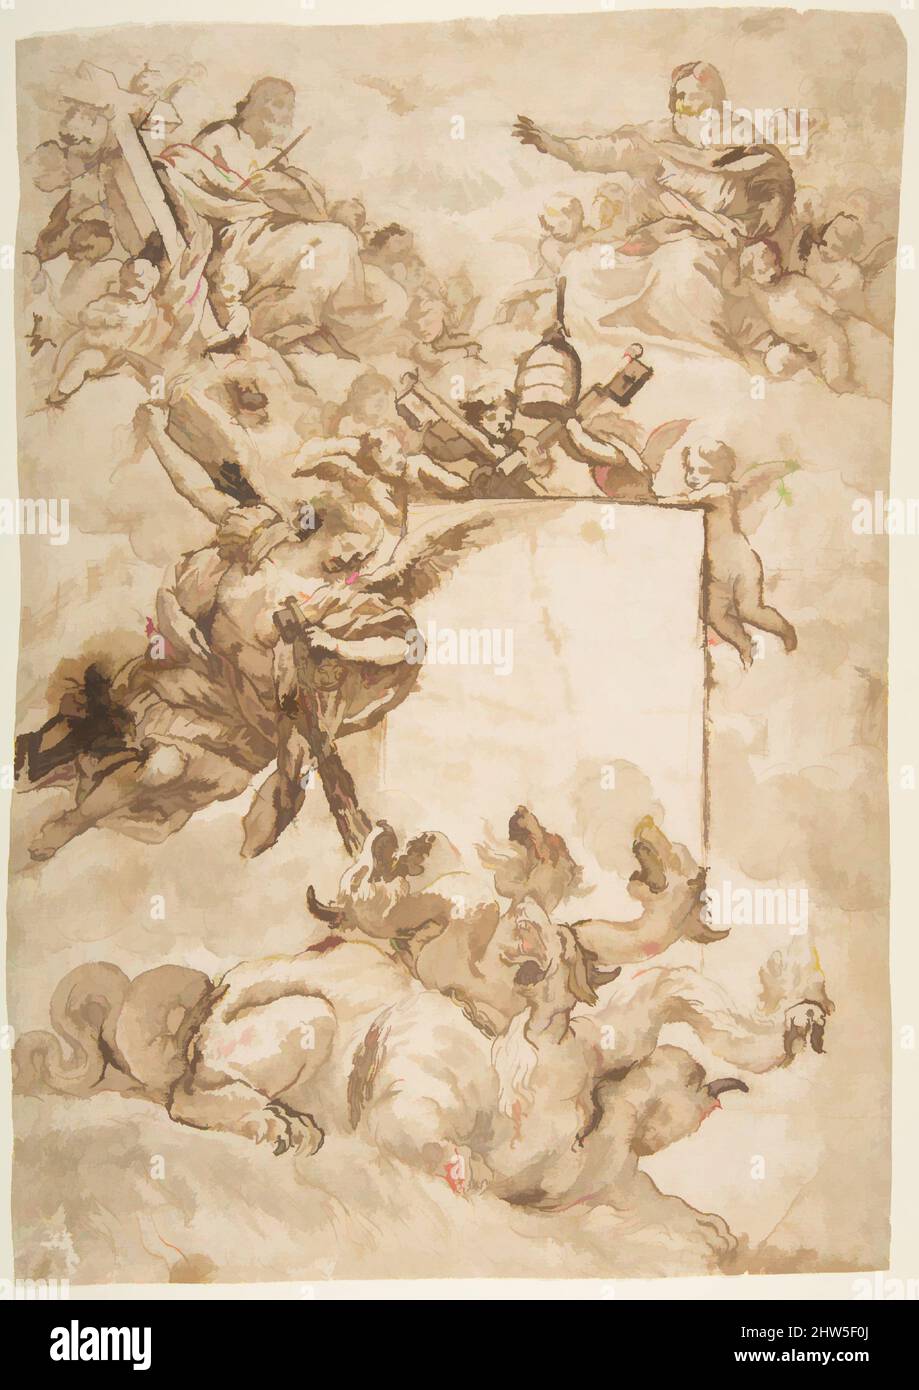 Art inspired by St. Michael Expurging Heresy., 1596–1669, Pen and brown ink, brush and brown wash over traces of black chalk, Sheet: 14 3/4 x 10 5/16 in. (37.4 x 26.2 cm), Drawings, Attributed to Pietro da Cortona (Pietro Berrettini) (Italian, Cortona 1596–1669 Rome, Classic works modernized by Artotop with a splash of modernity. Shapes, color and value, eye-catching visual impact on art. Emotions through freedom of artworks in a contemporary way. A timeless message pursuing a wildly creative new direction. Artists turning to the digital medium and creating the Artotop NFT Stock Photo